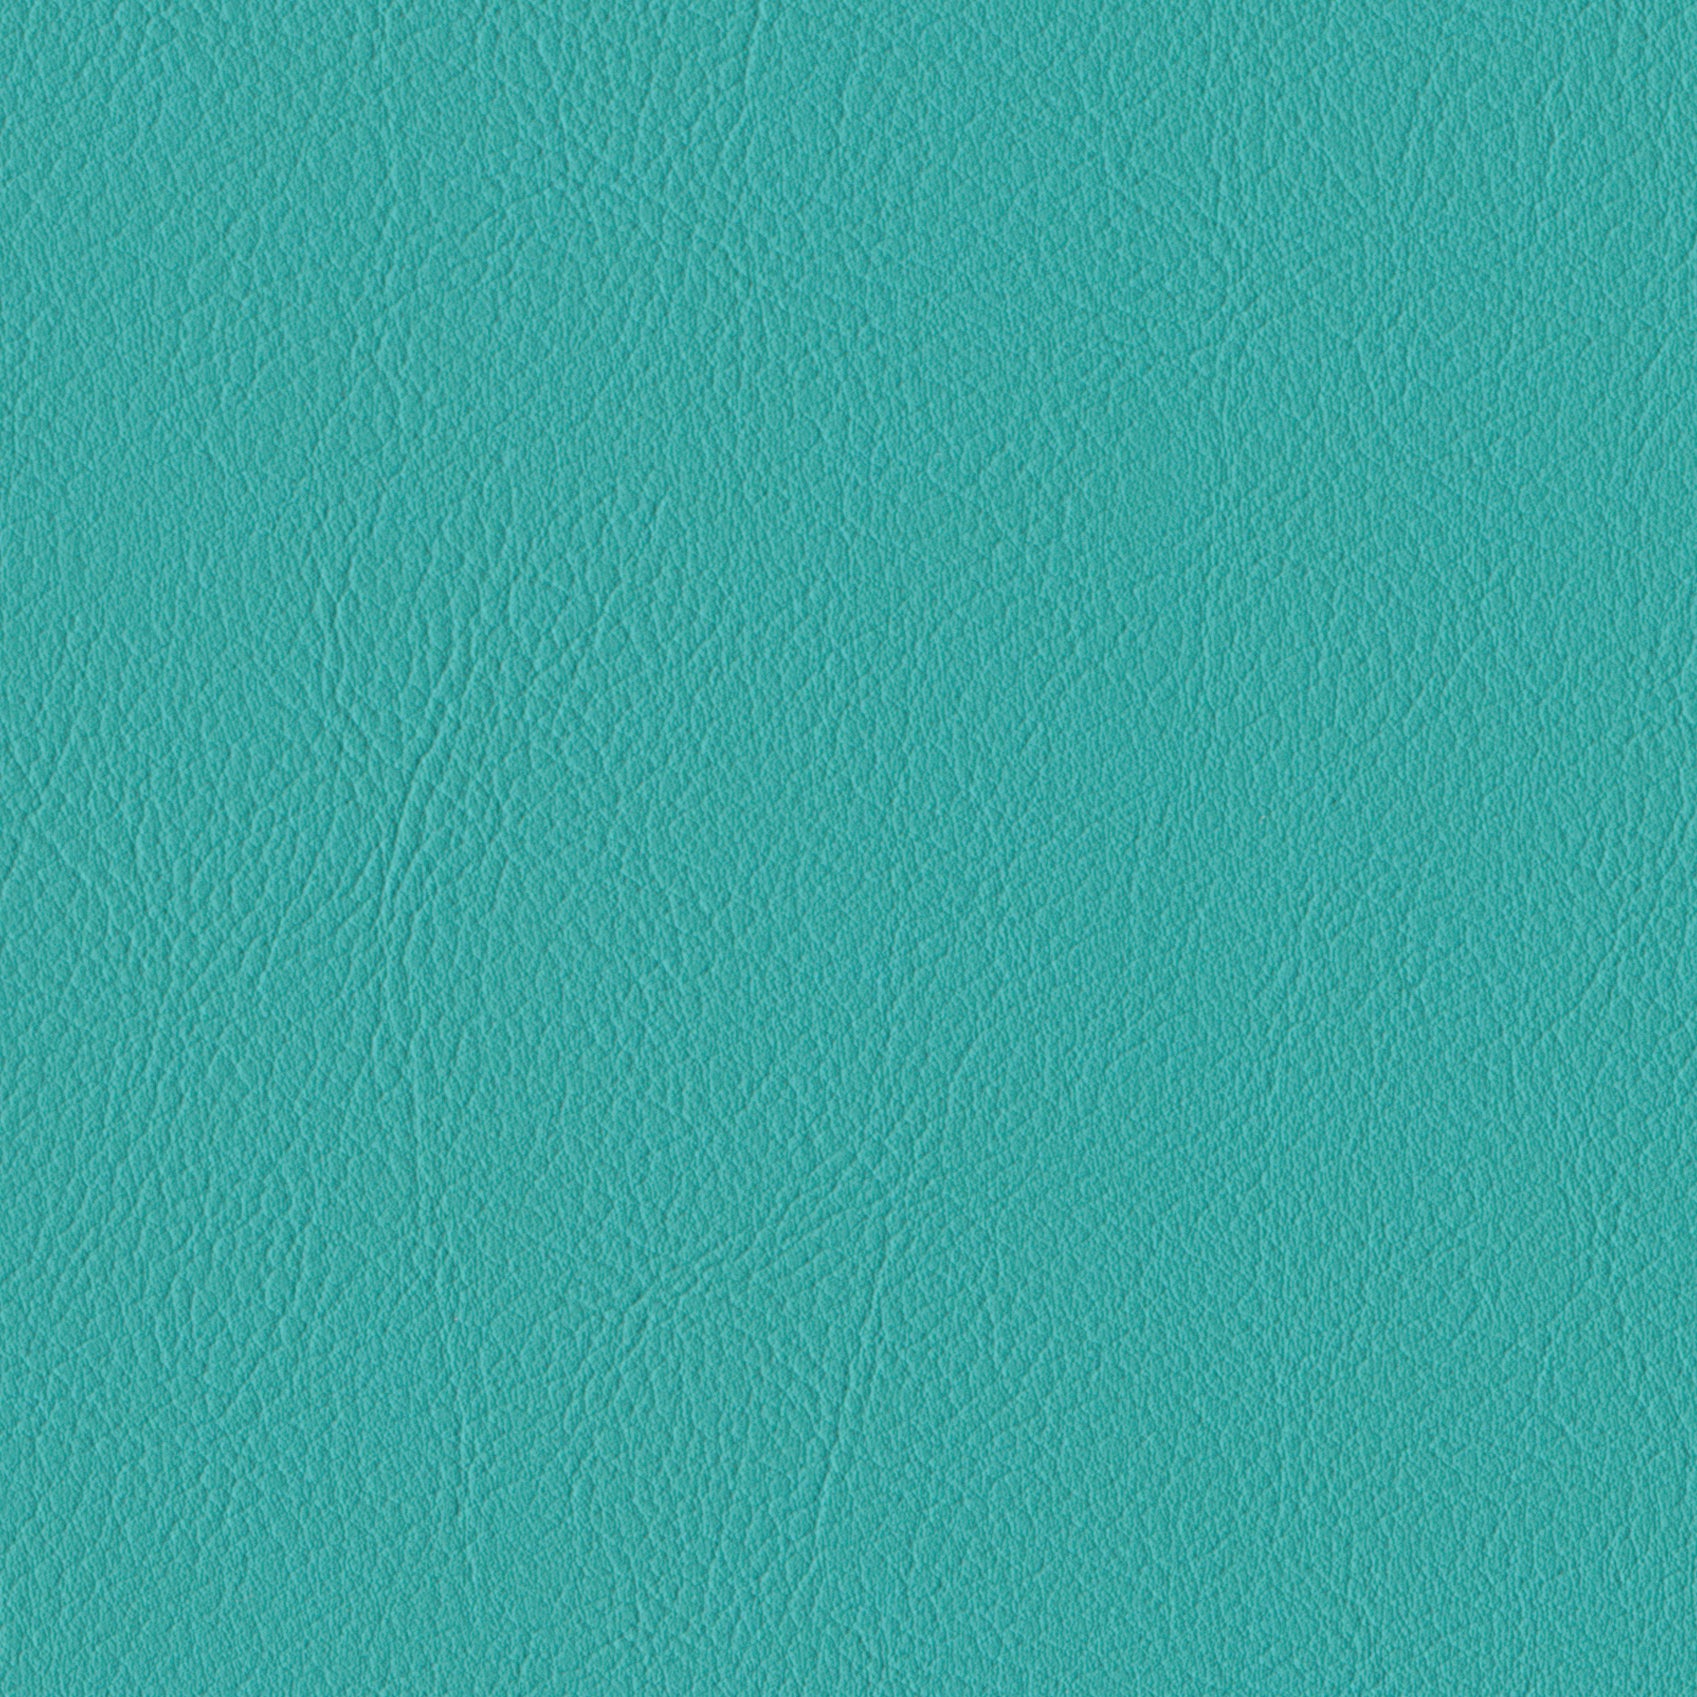    Andriali-Contract-Vinyl_Upholstery-Design-LegacyFR-Color-500Turquoise-Width-140cm